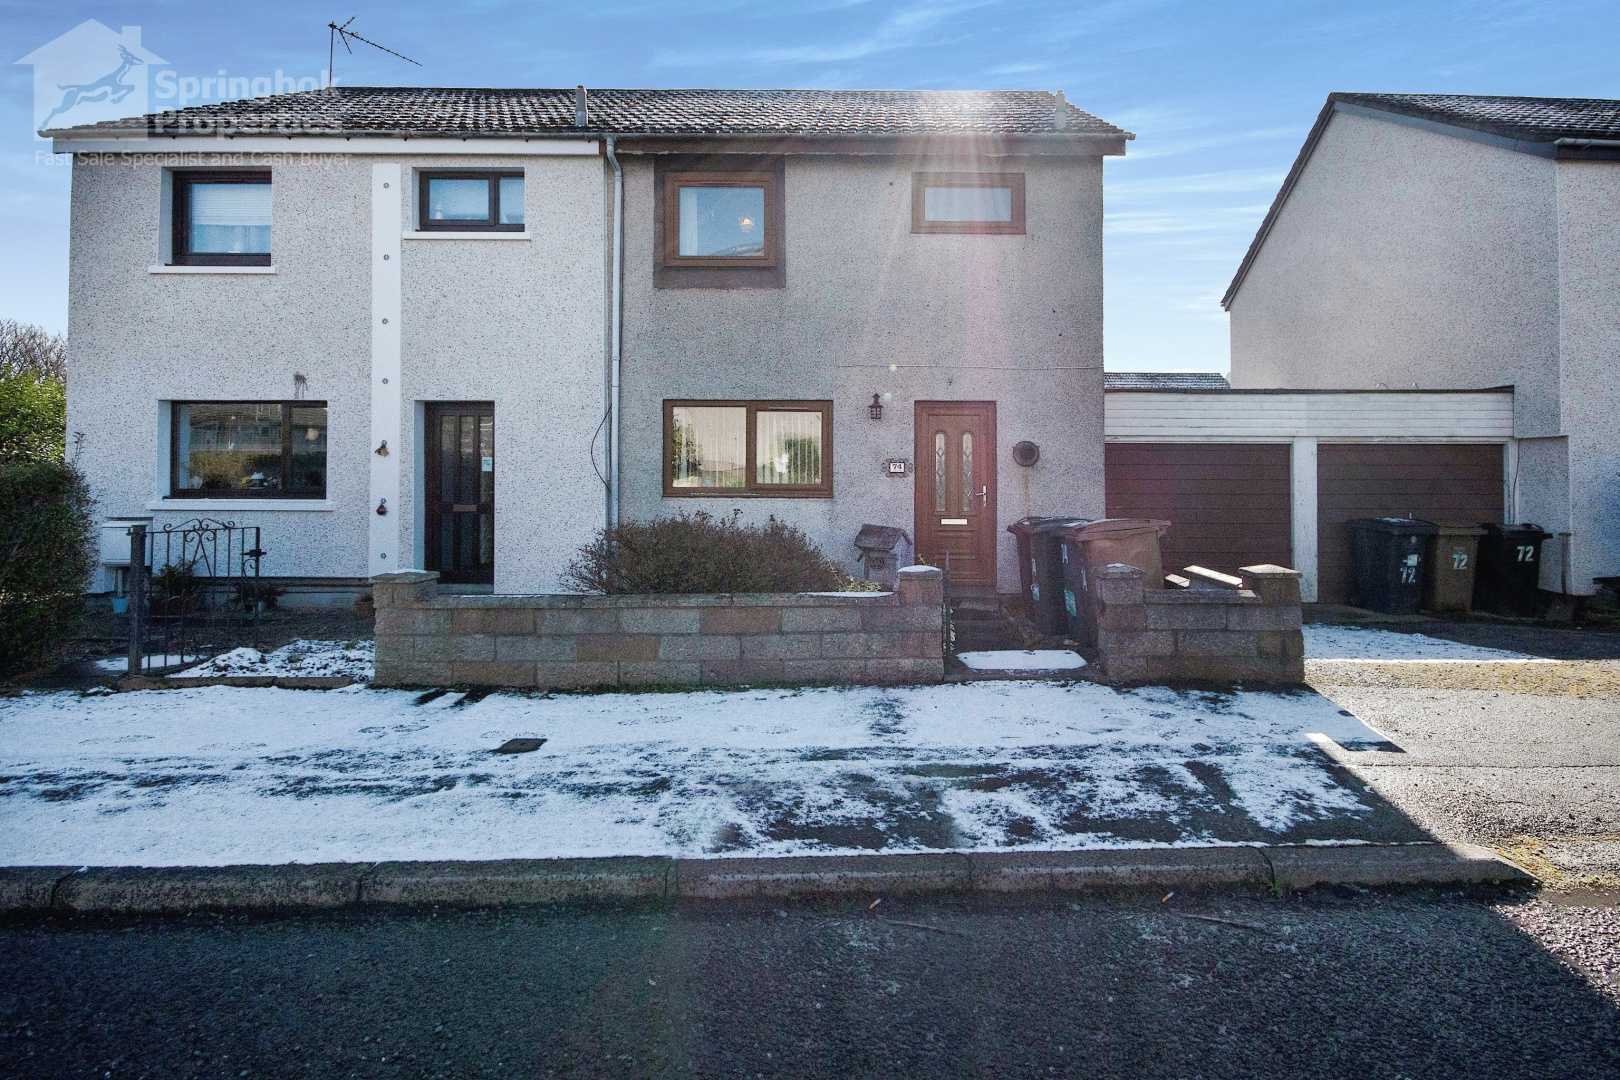 House in Denmore, Aberdeen City 11721740